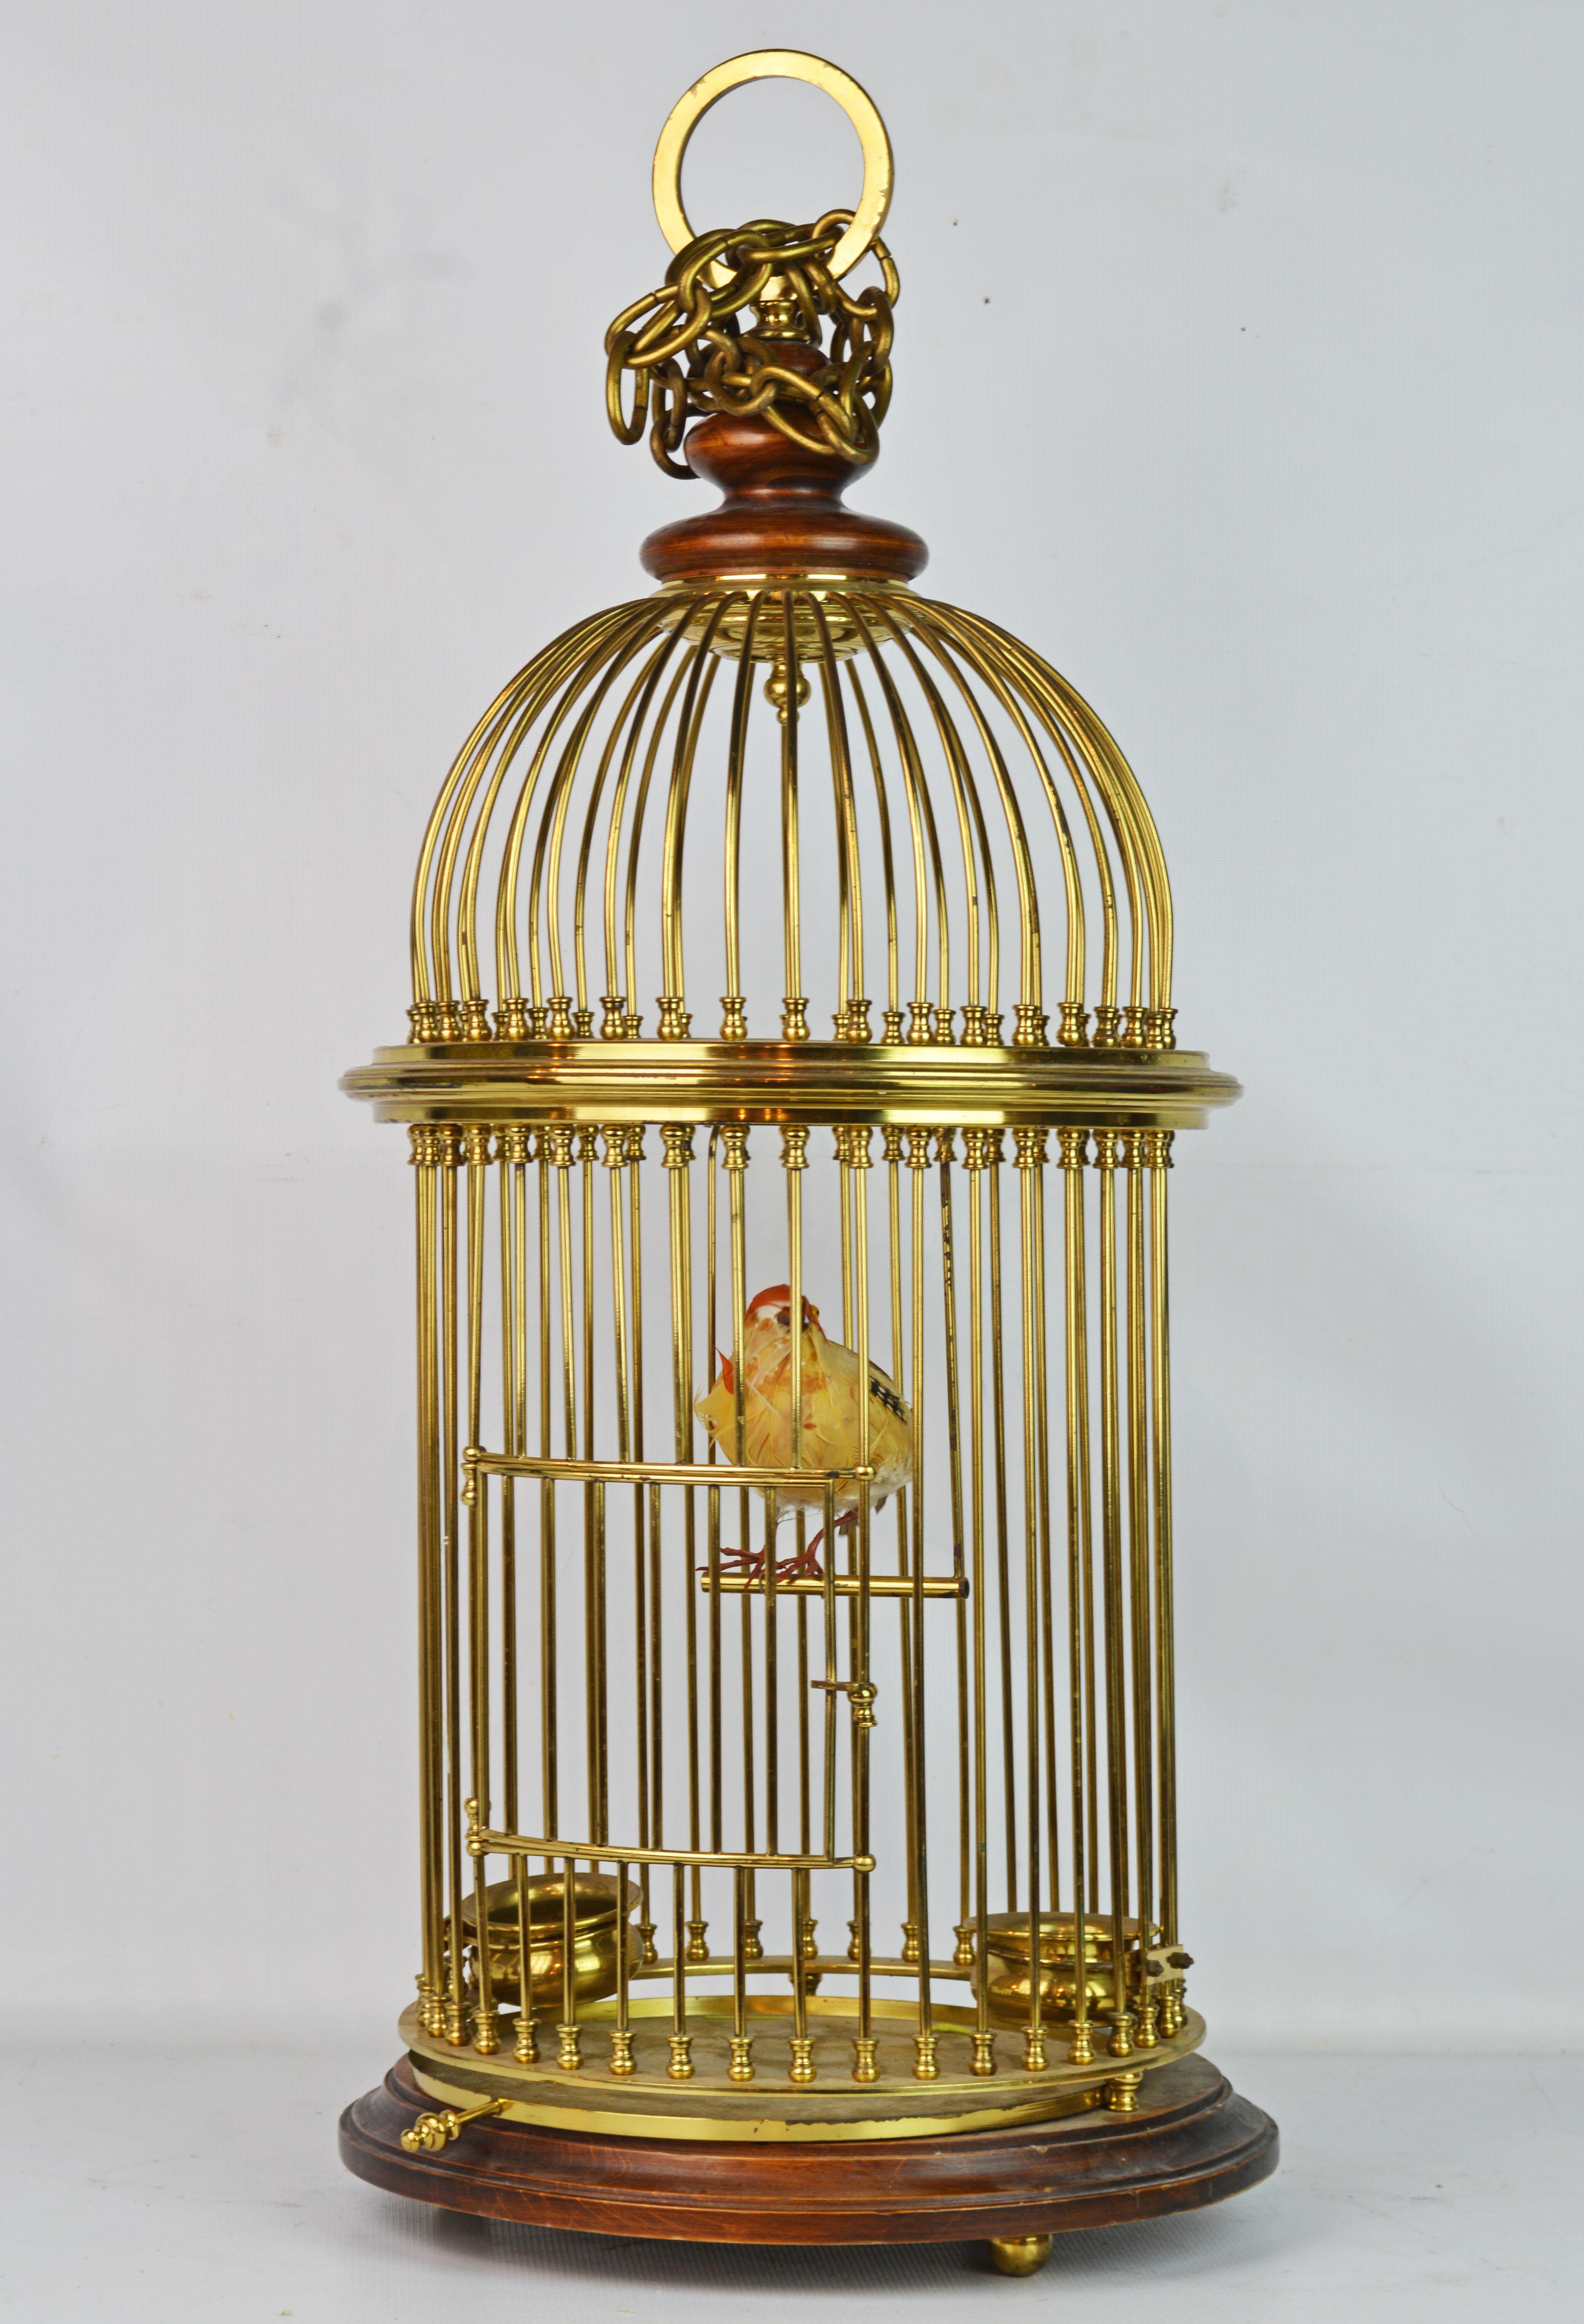 Made with great craftsmanship of solid brass this bird cage sits on a circular carved base and is surmounted by a turned wood finial to which a chain for hanging is mounted. The bird perched on a swing inside the cage is a model of a tropical